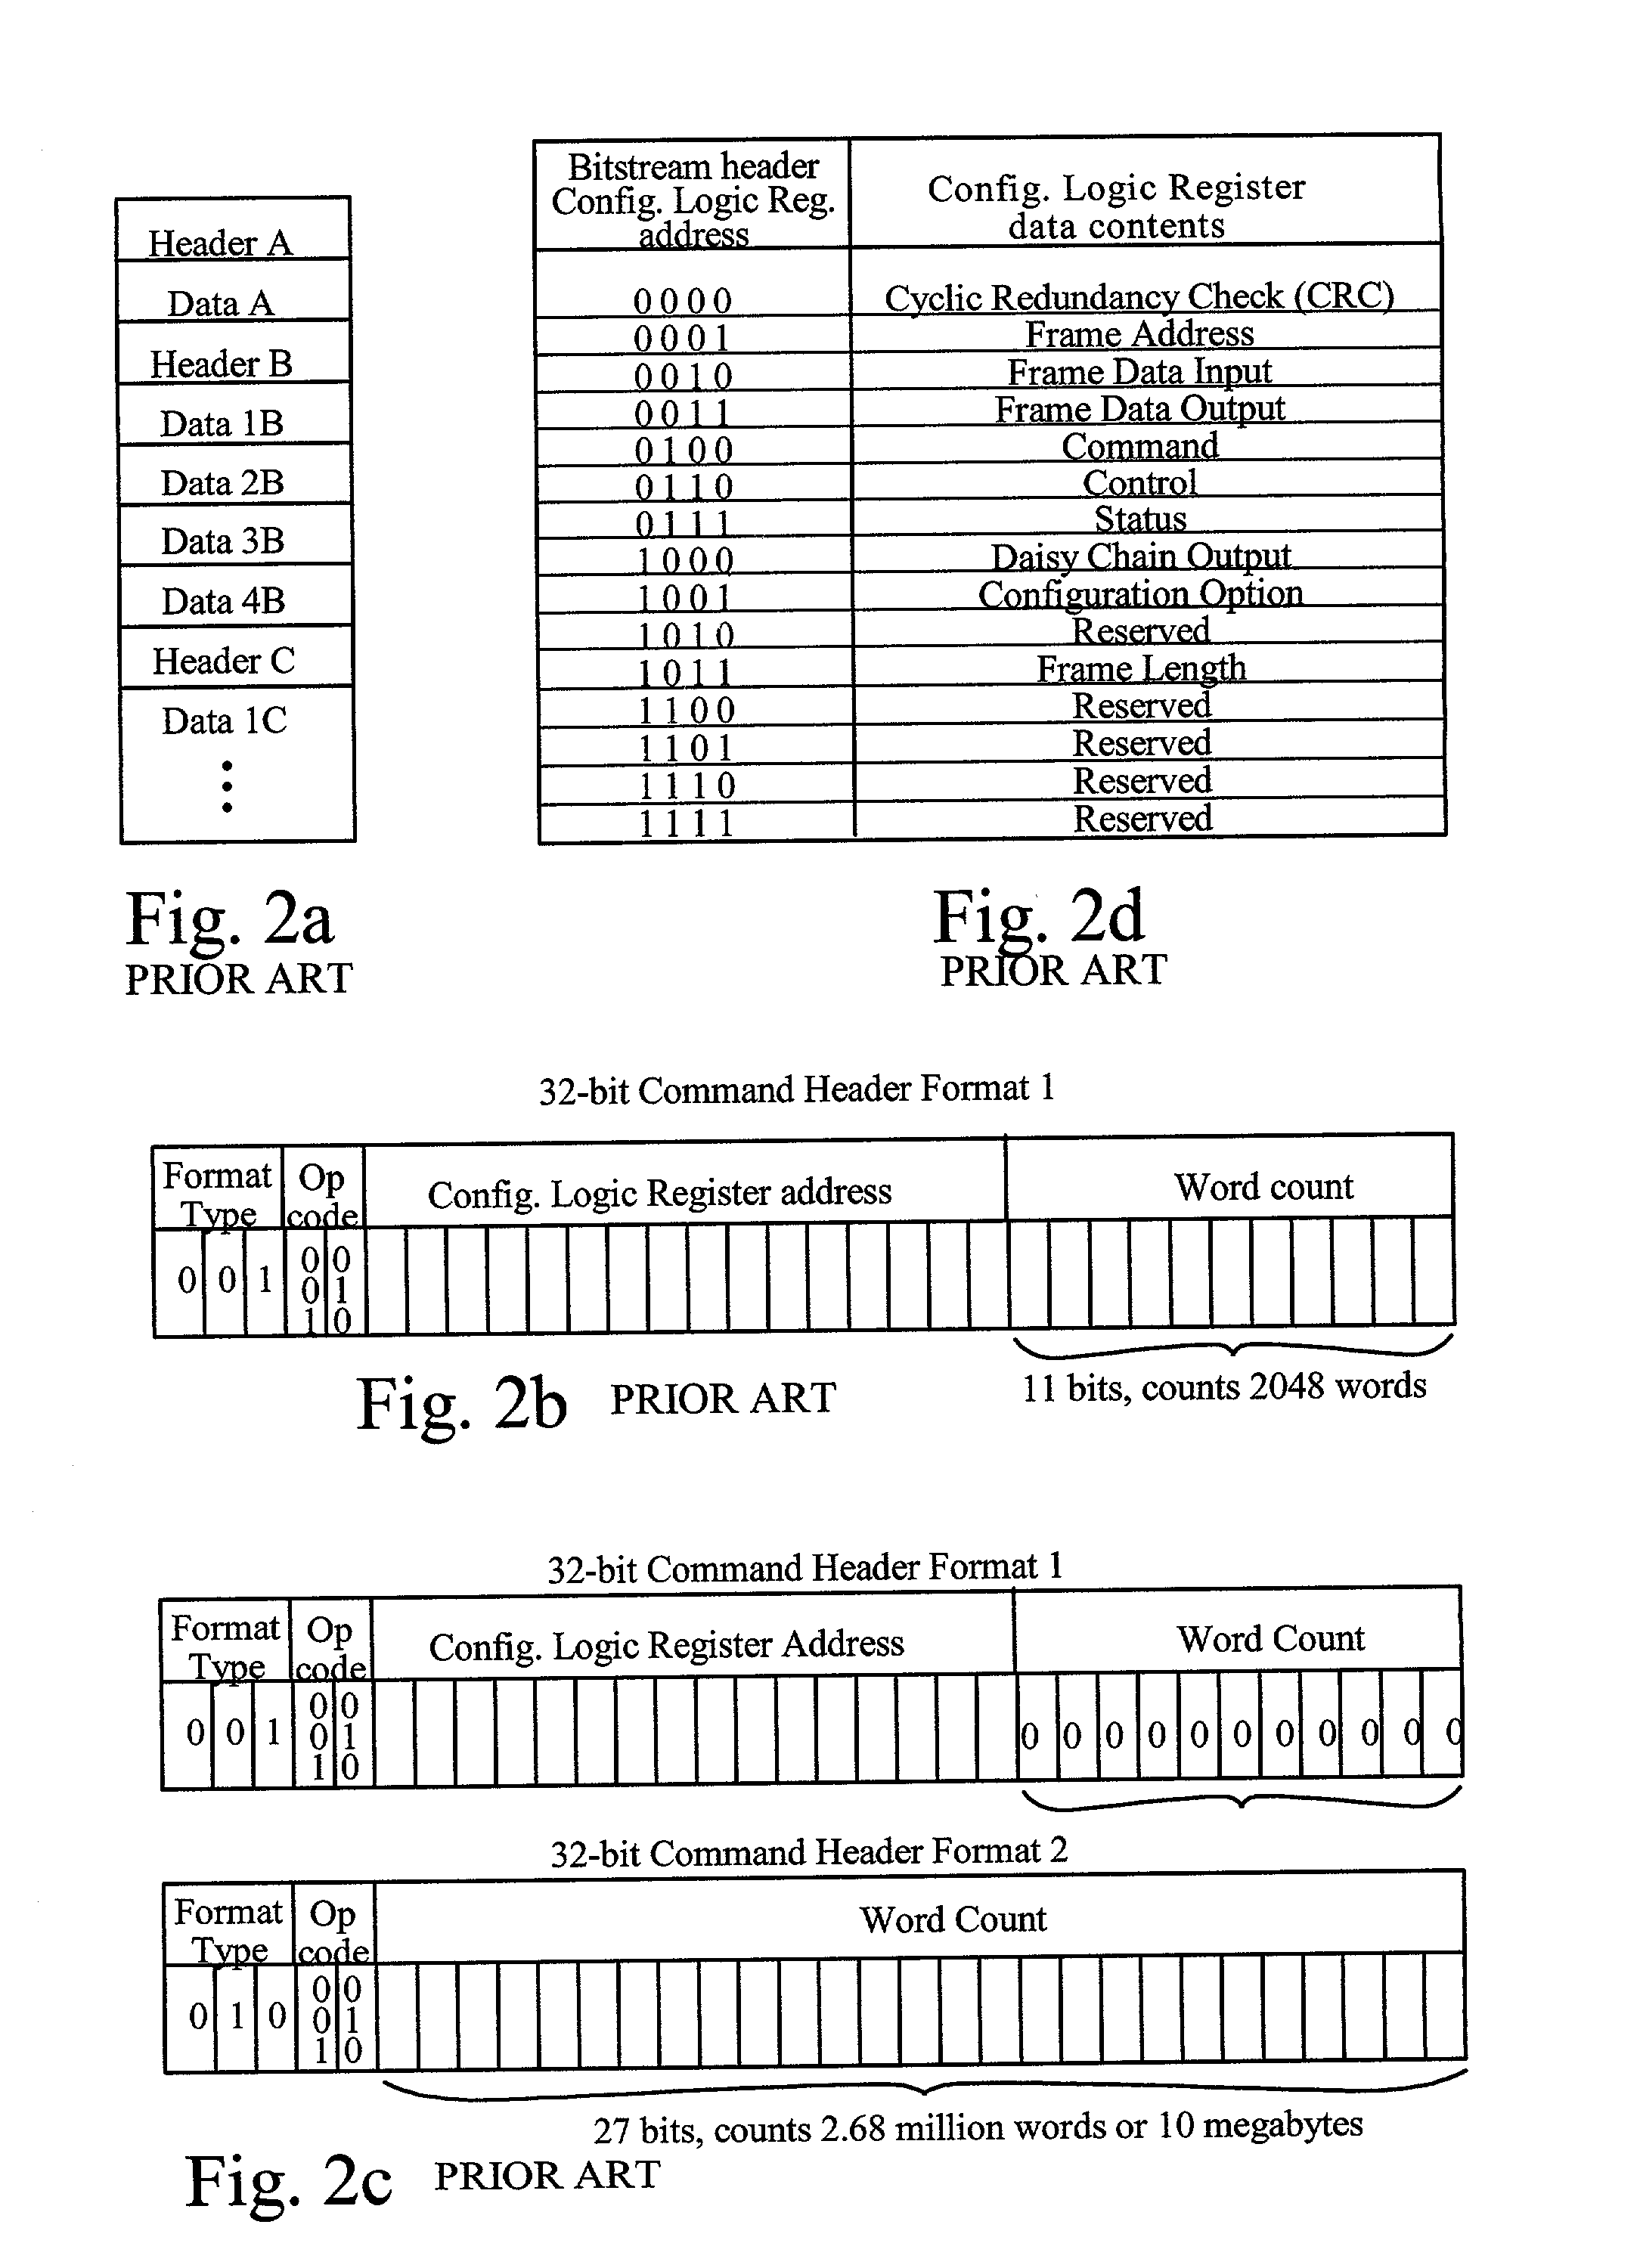 Error-checking and correcting decryption-key memory for programmable logic devices